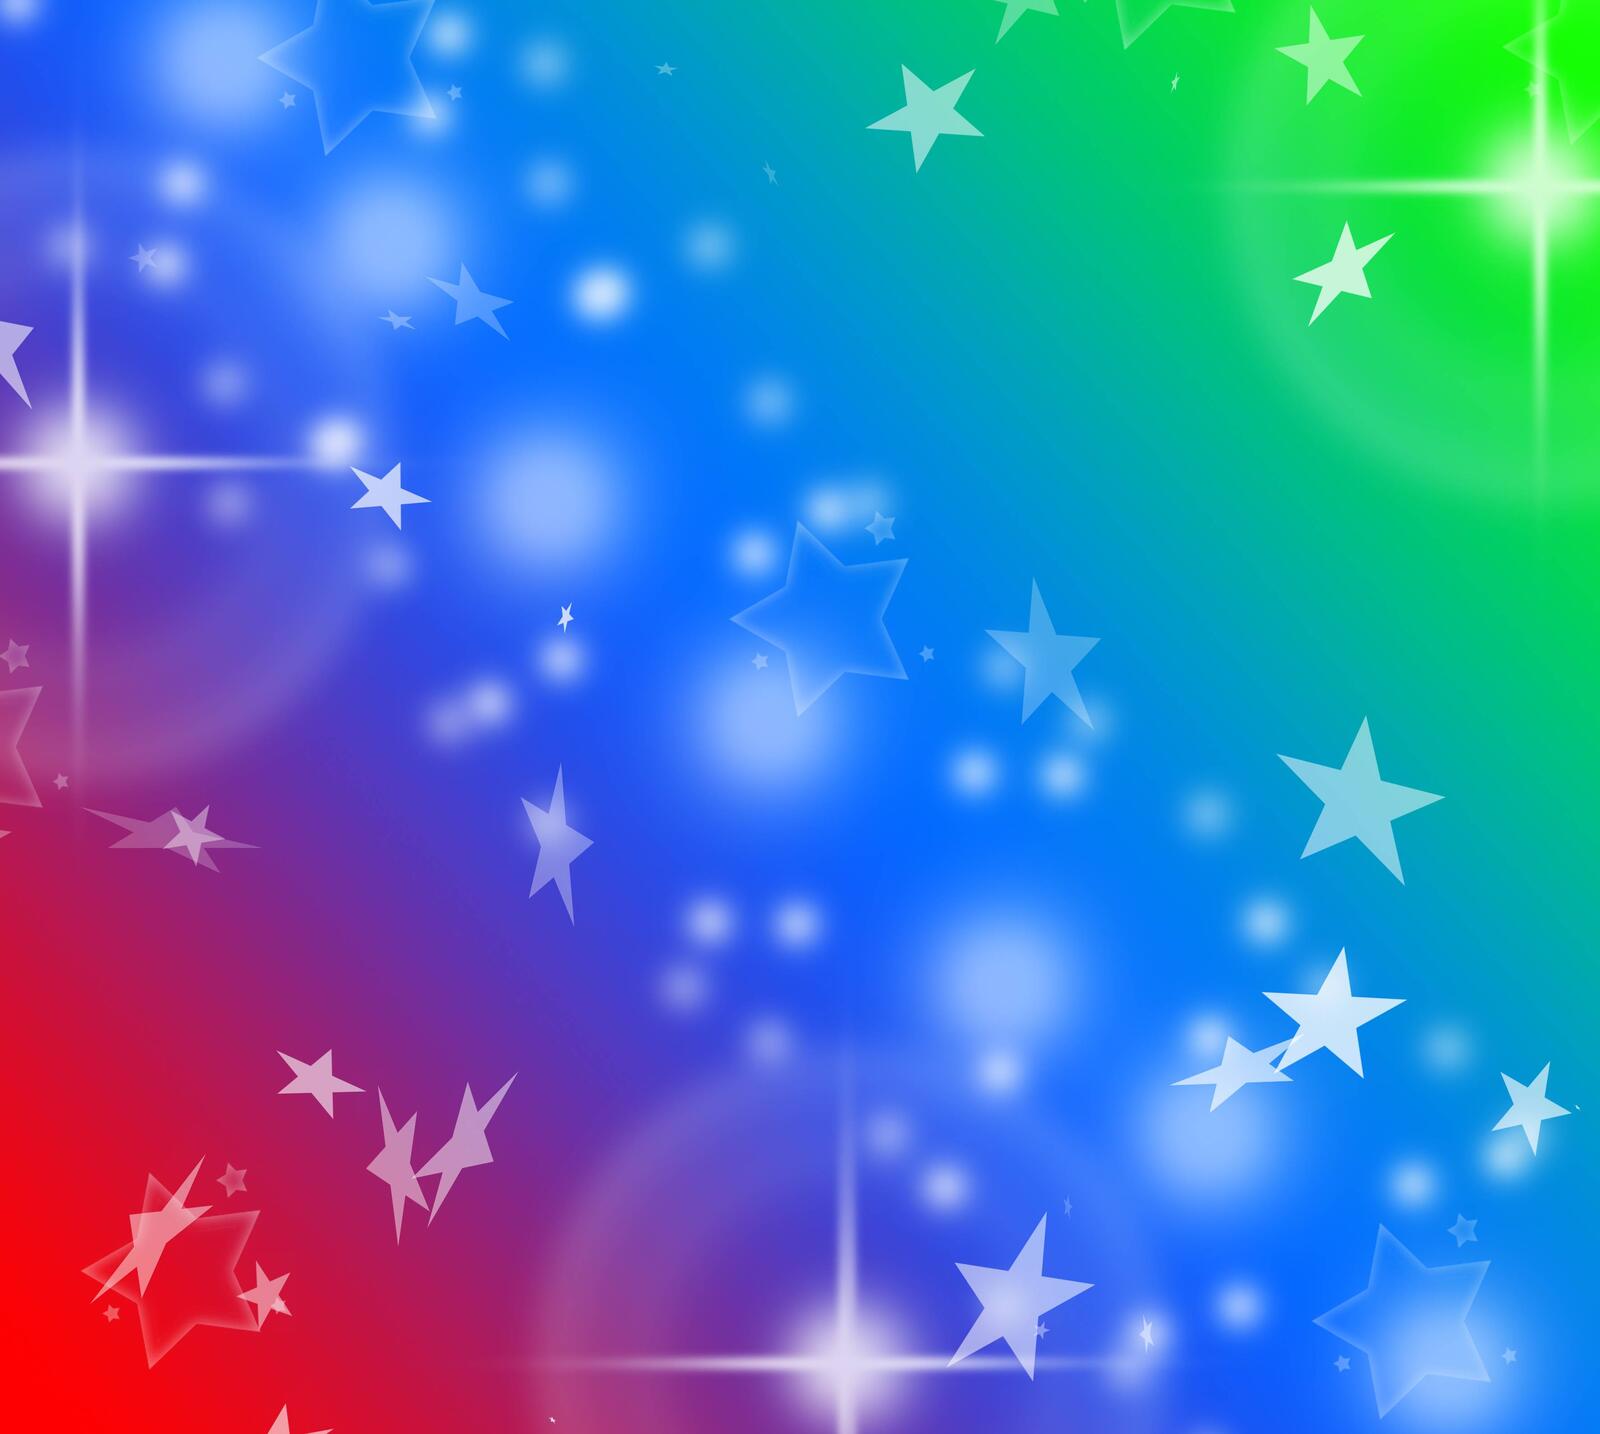 Wallpapers stars background graphics on the desktop